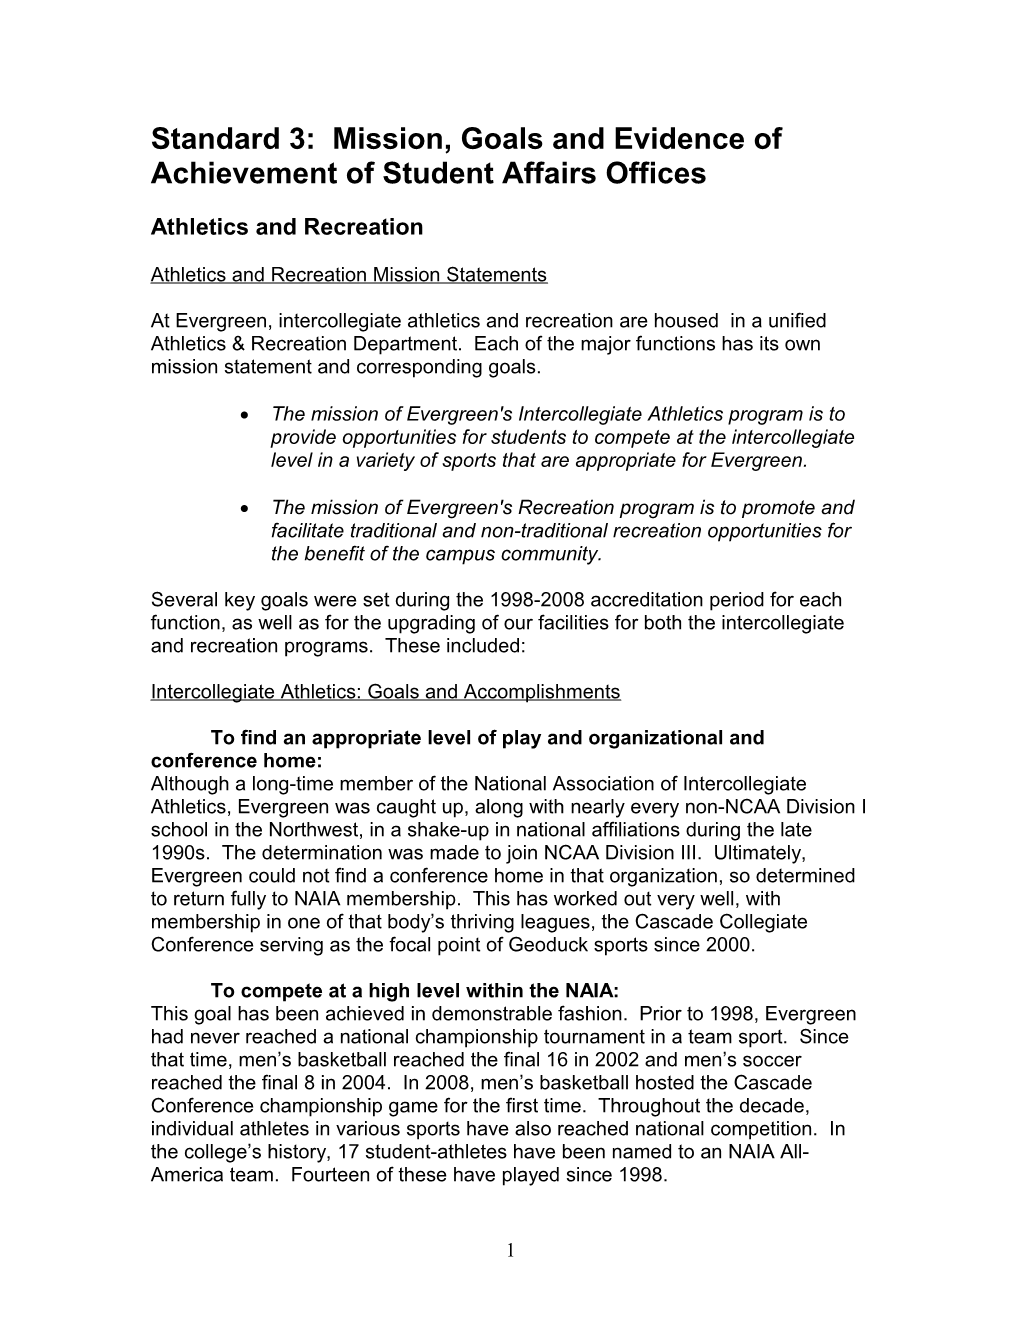 Standard 3: Mission, Goals and Evidence of Achievement of Student Affairs Offices